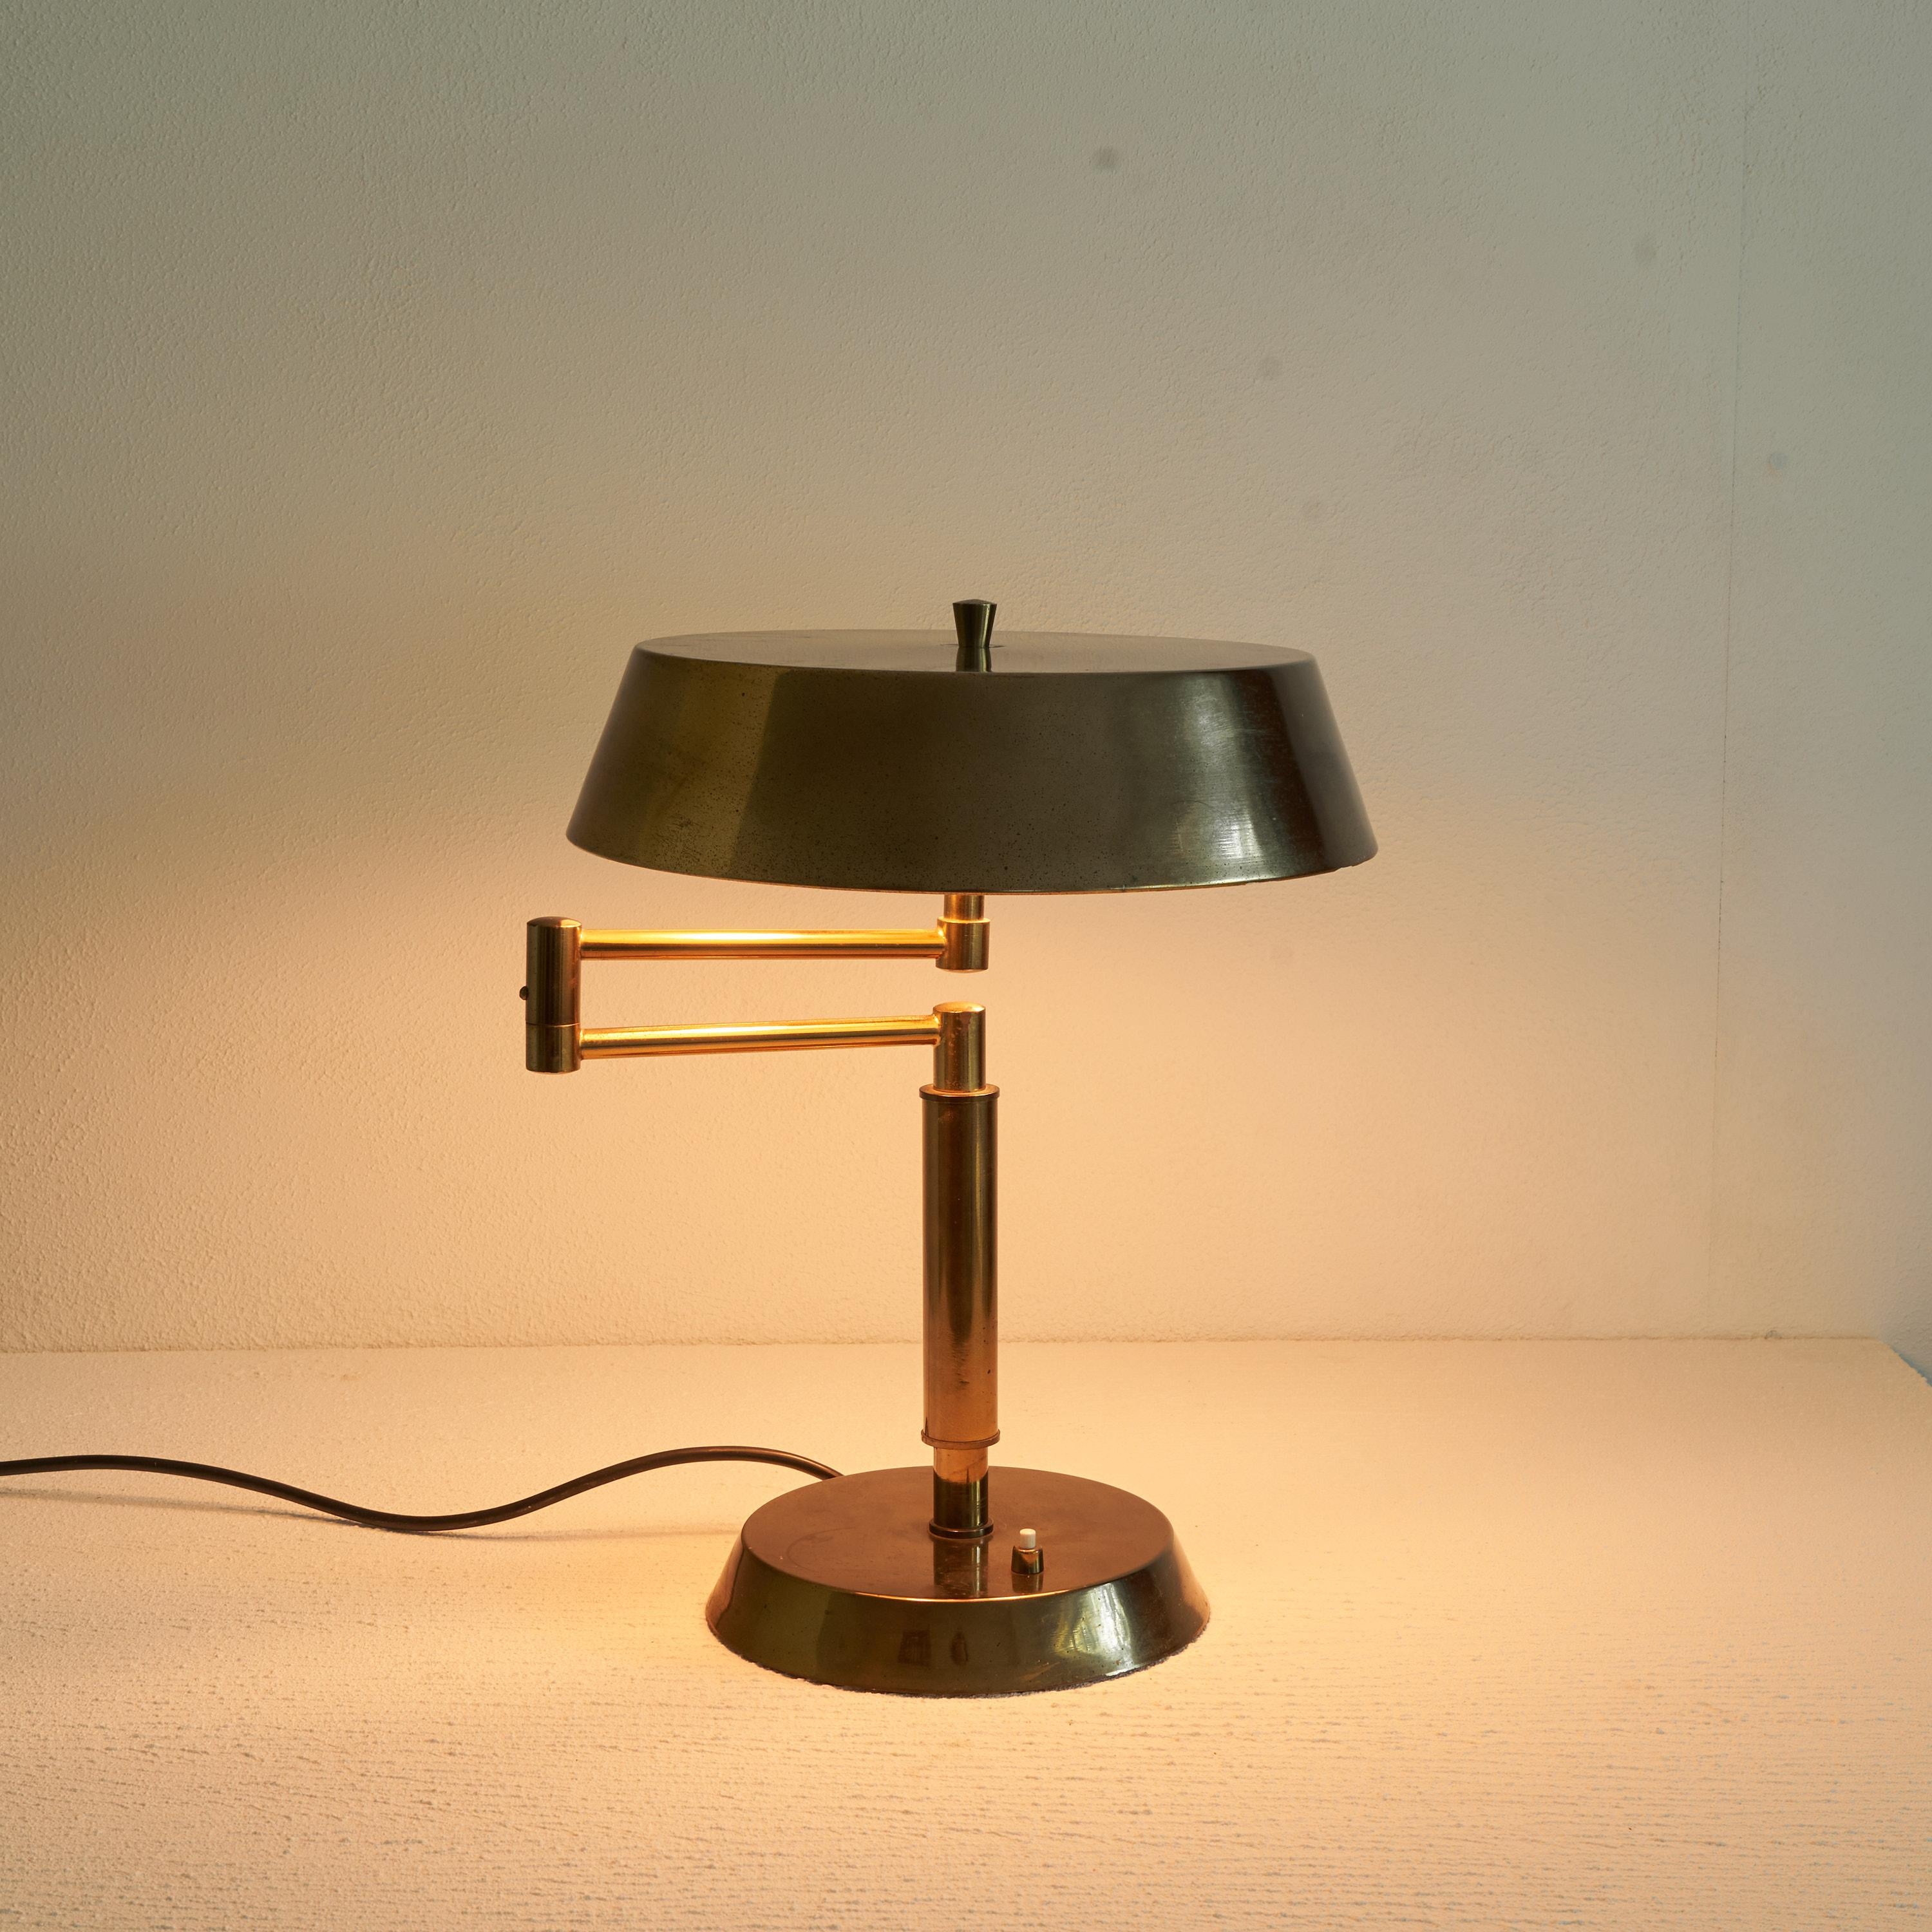 Articulating Table Lamp in Patinated Brass, 1960s For Sale 7